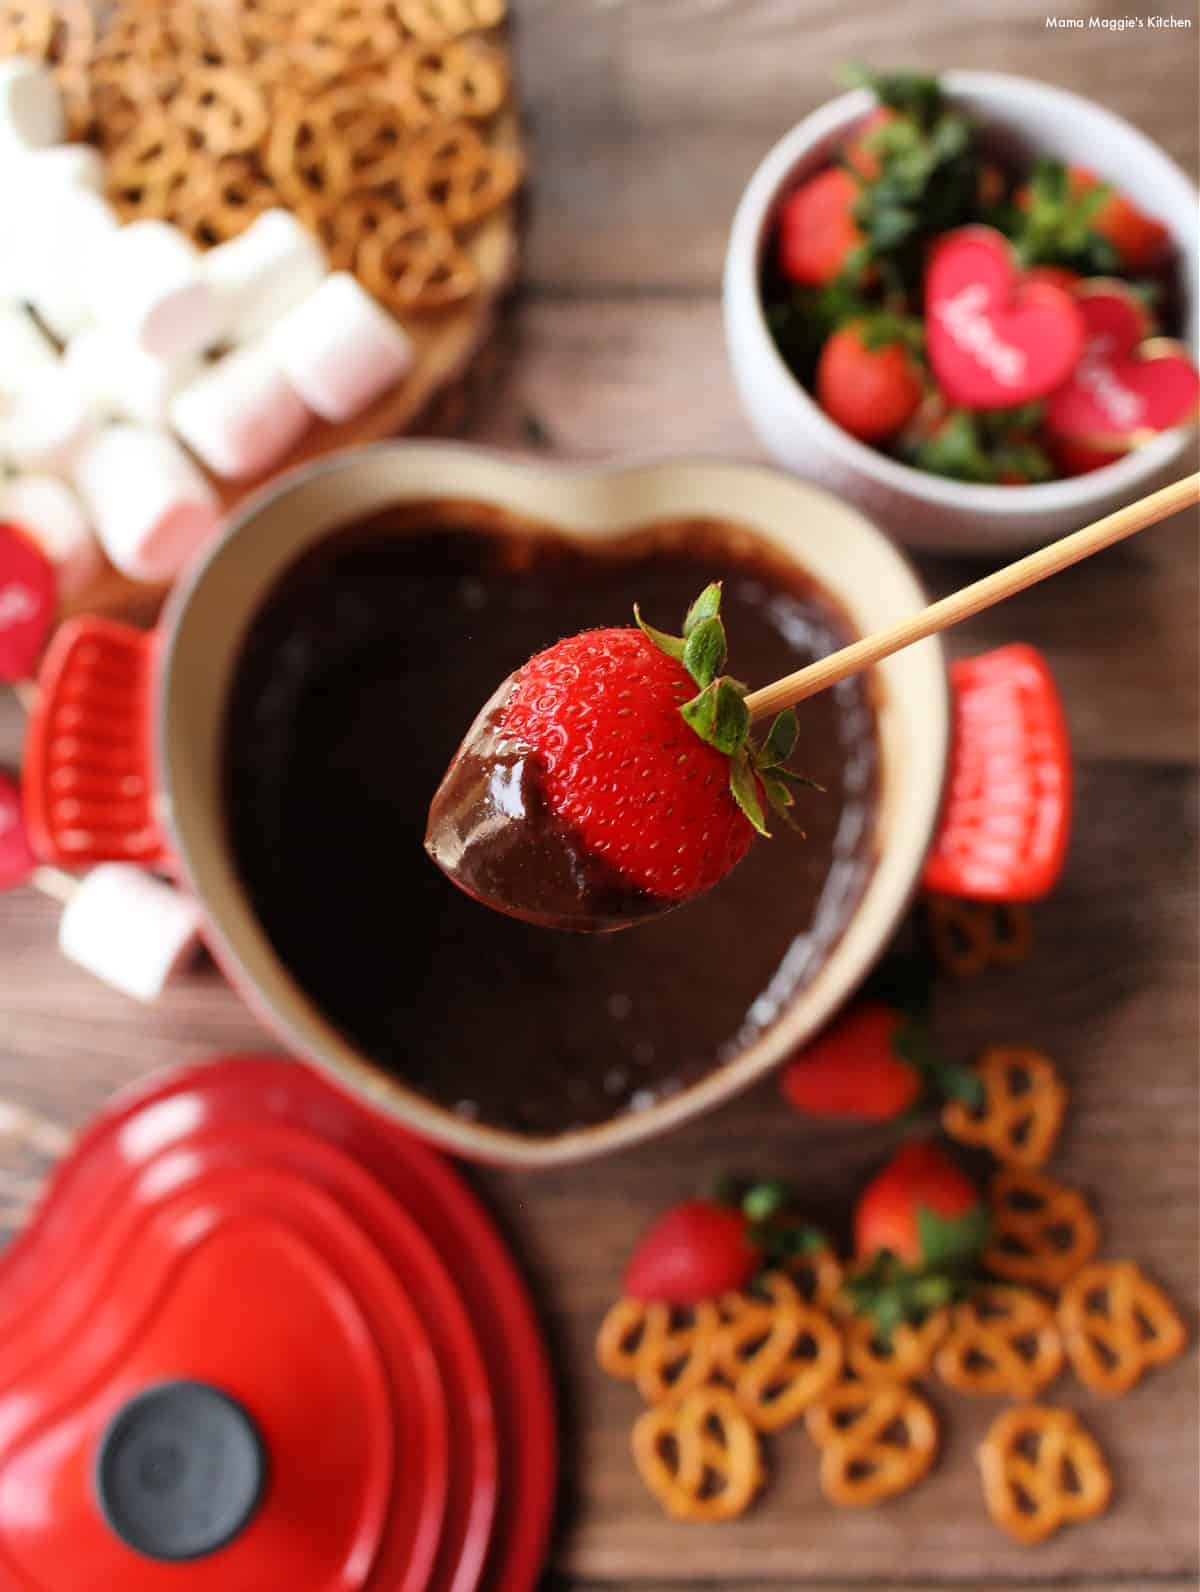 A skewer holding a strawberry covered in chocolate over the fondue pot.